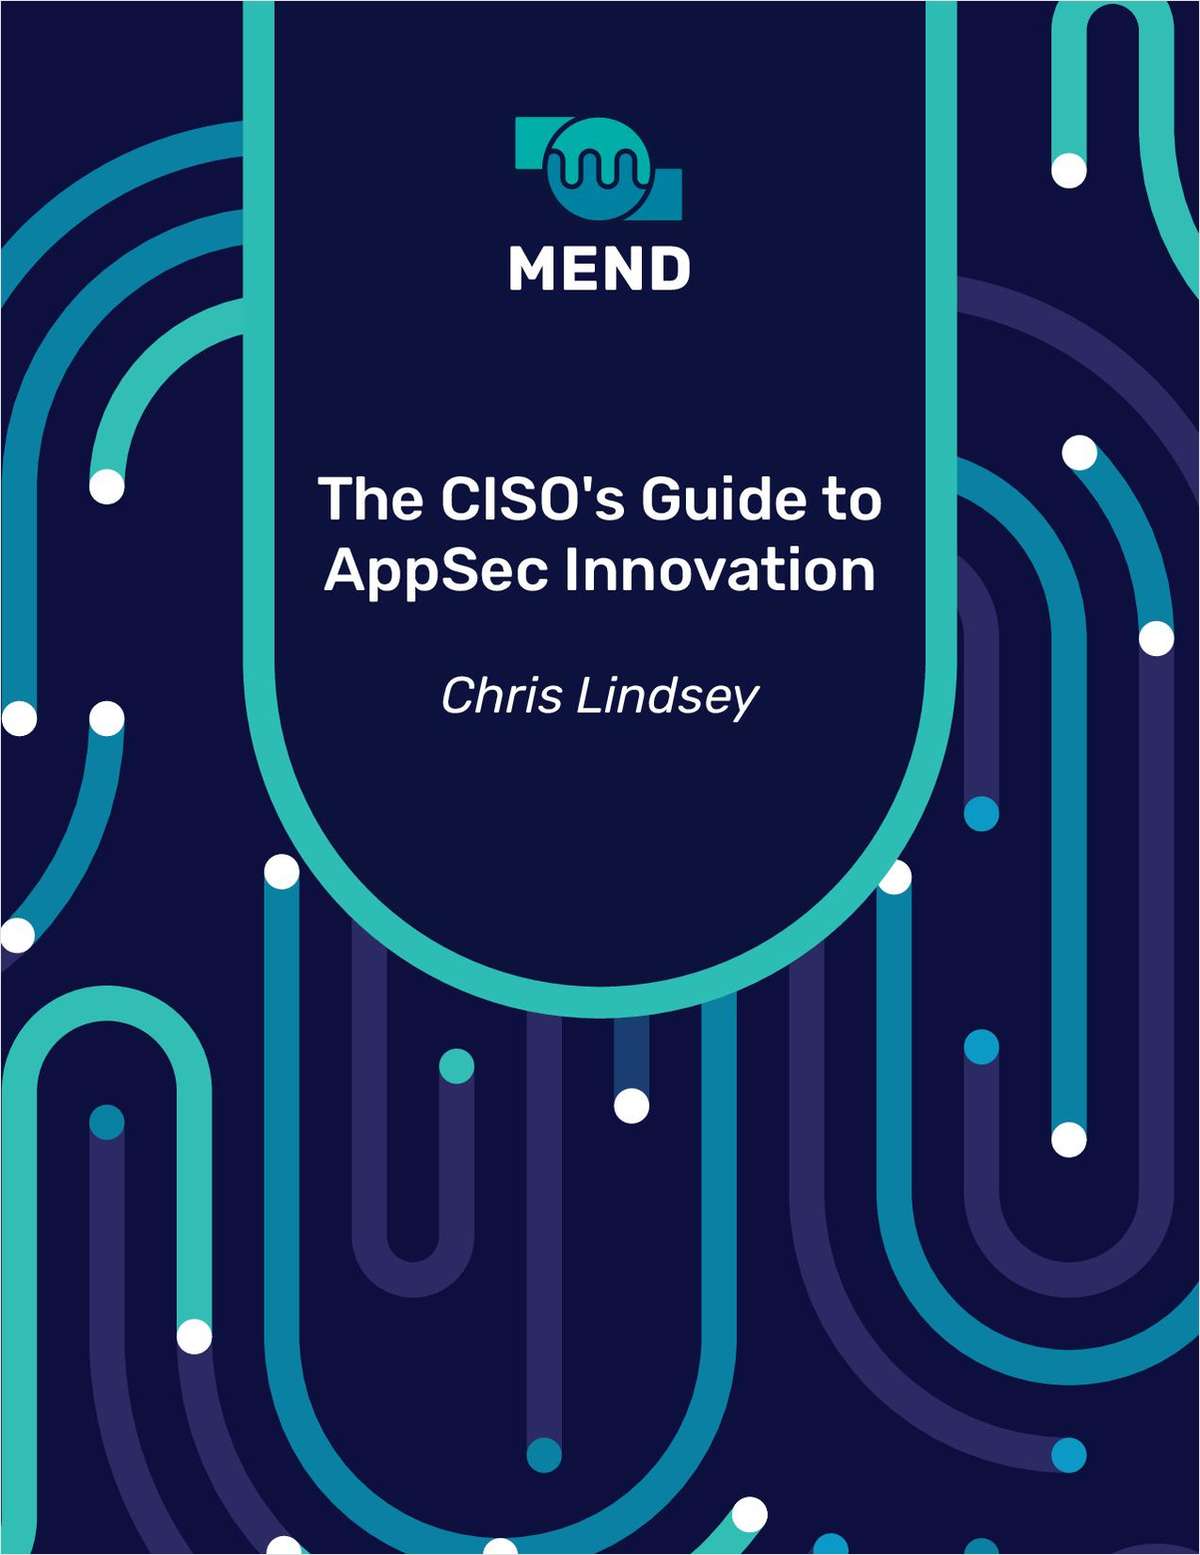 The CISO's Guide to AppSec Innovation